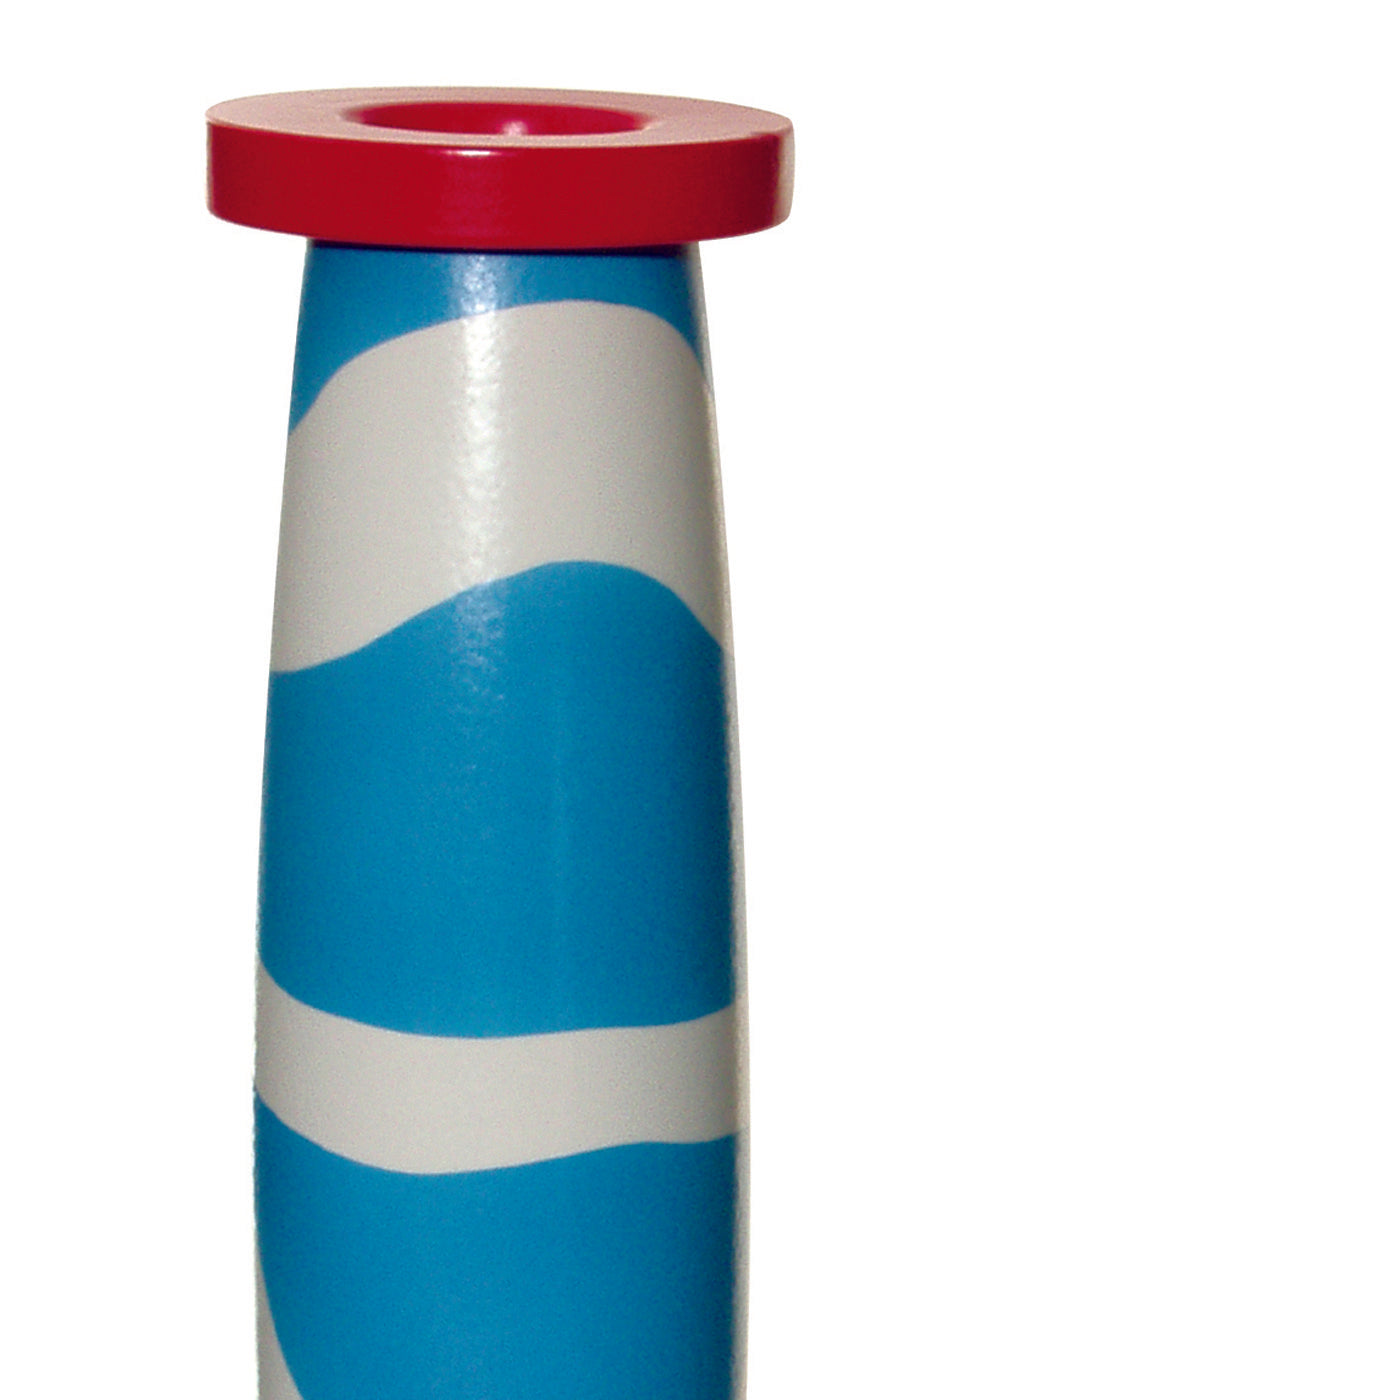 Red, Blue and White Vase by George J. Sowden - Alternative view 1